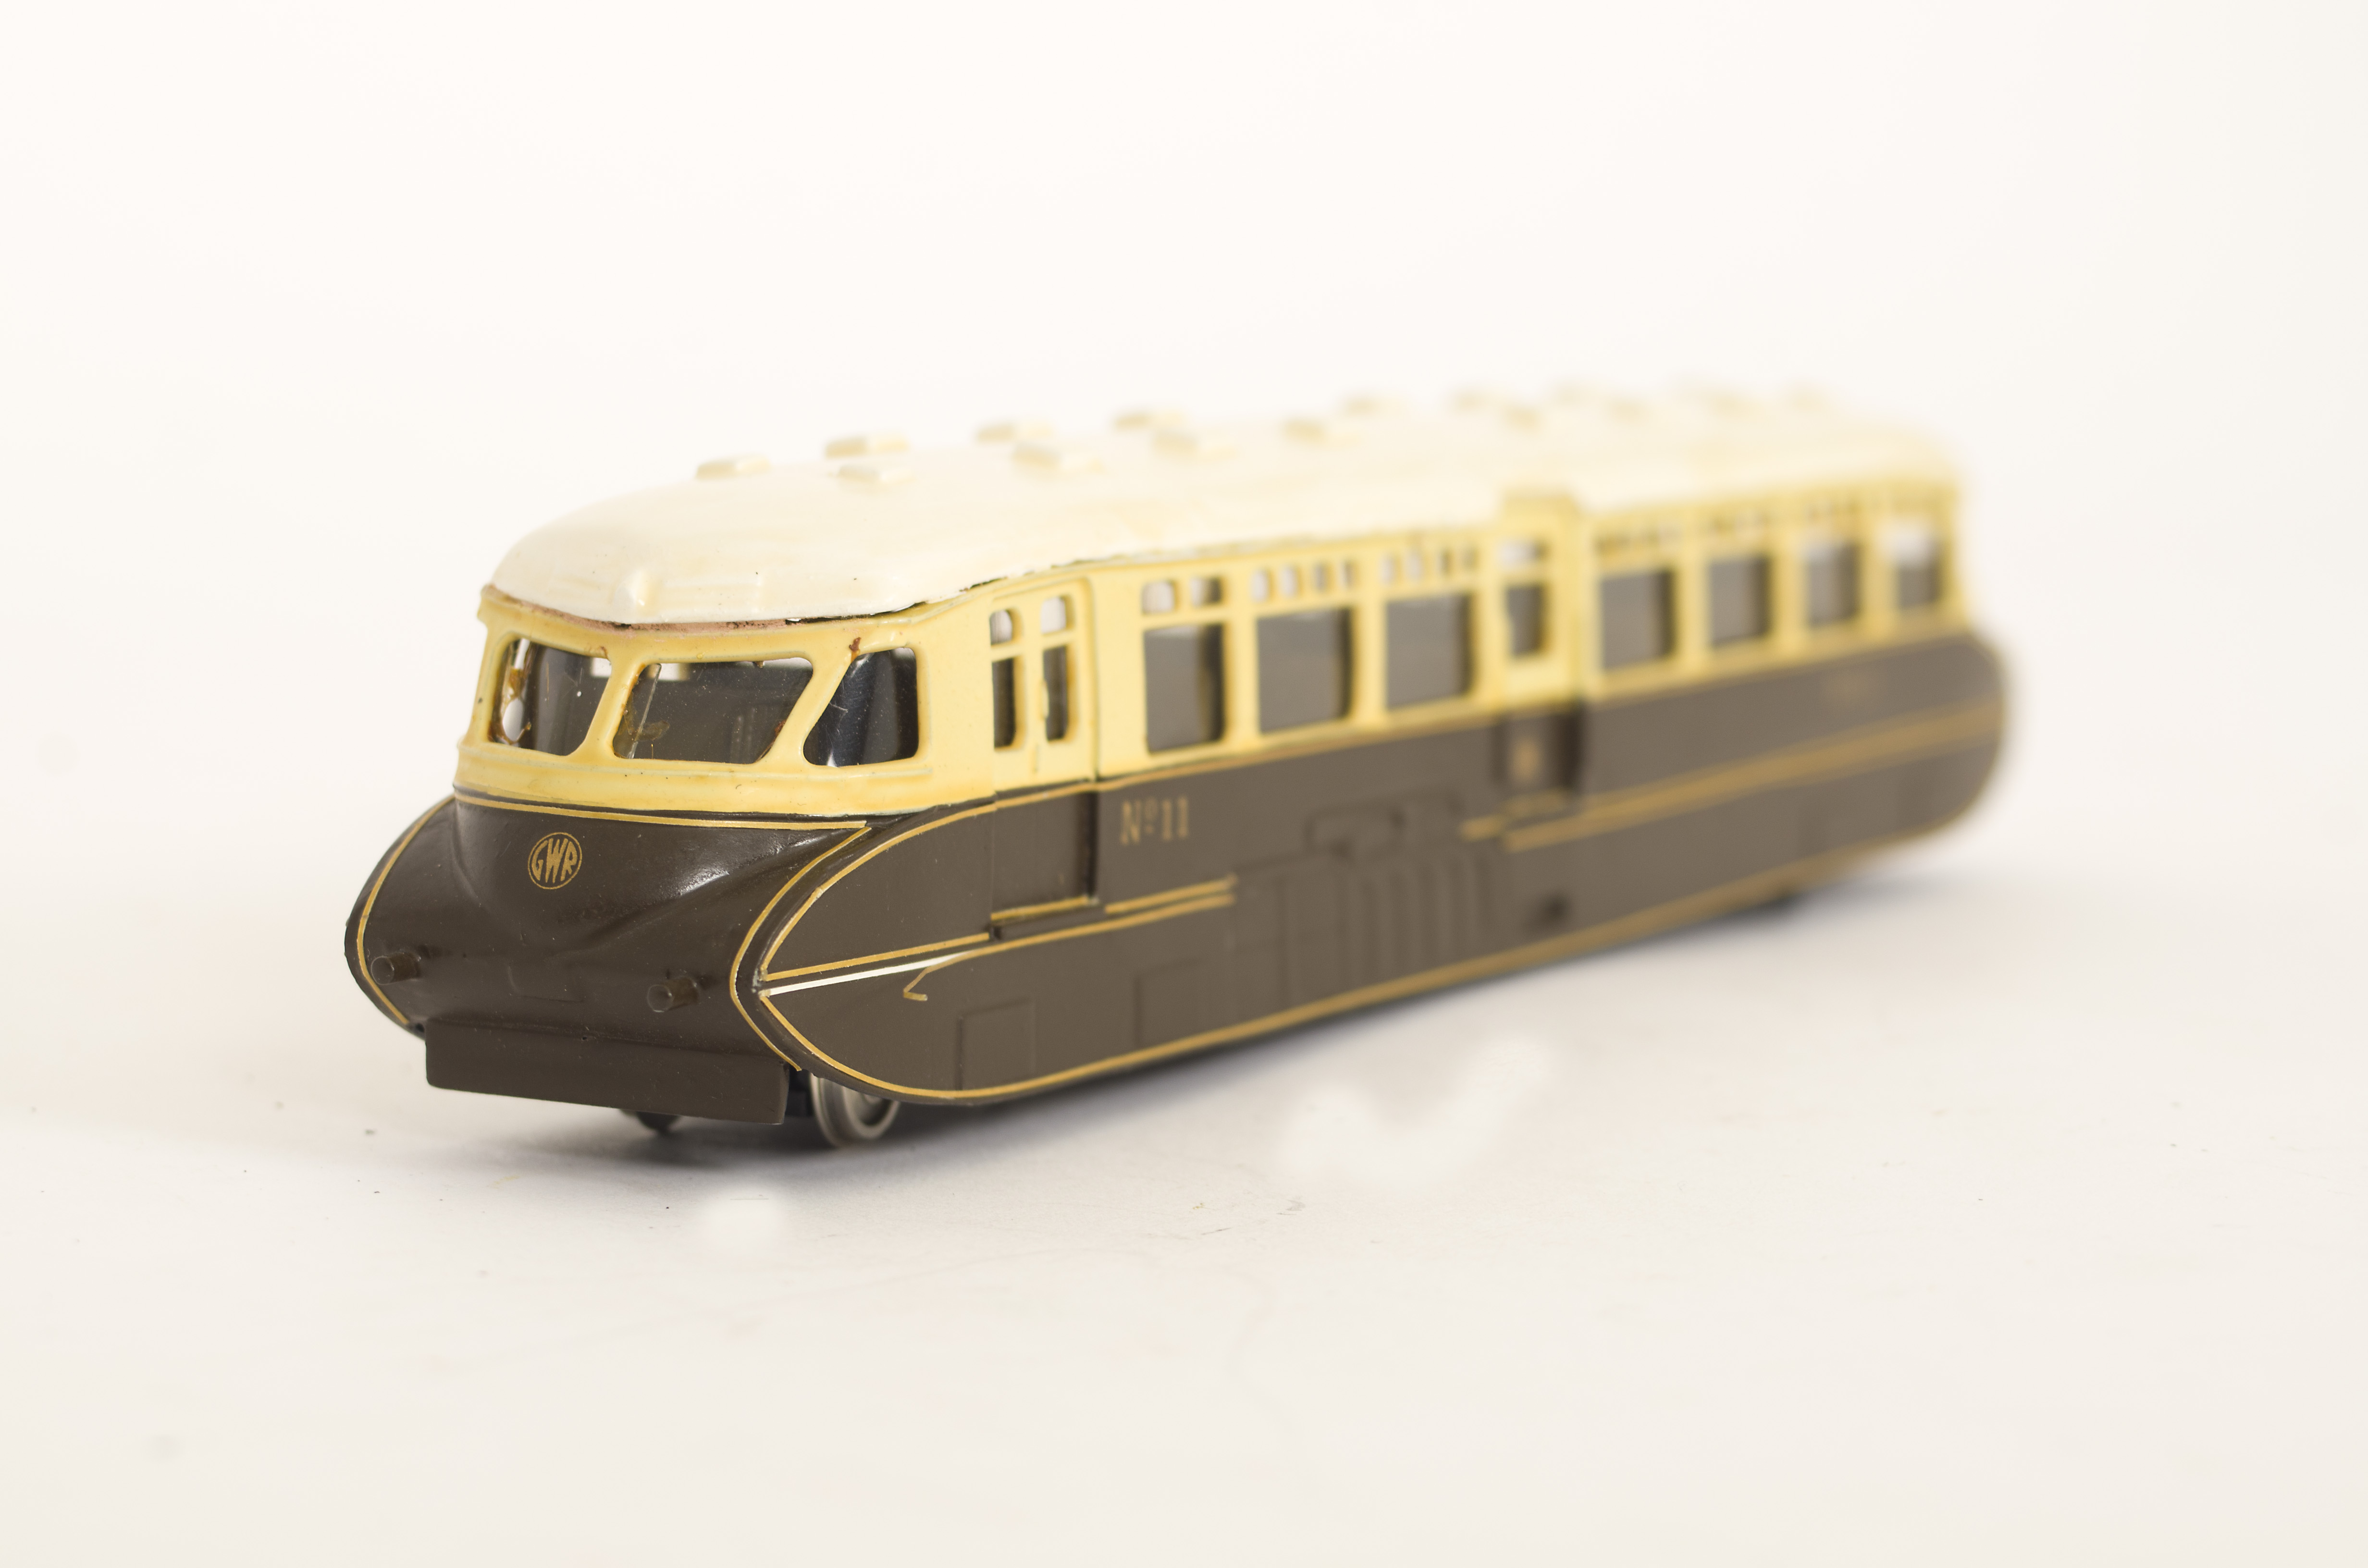 Anbrico 00 Gauge Kitbuilt GWR Railcar No 11, built and painted to a very good standard, fitted